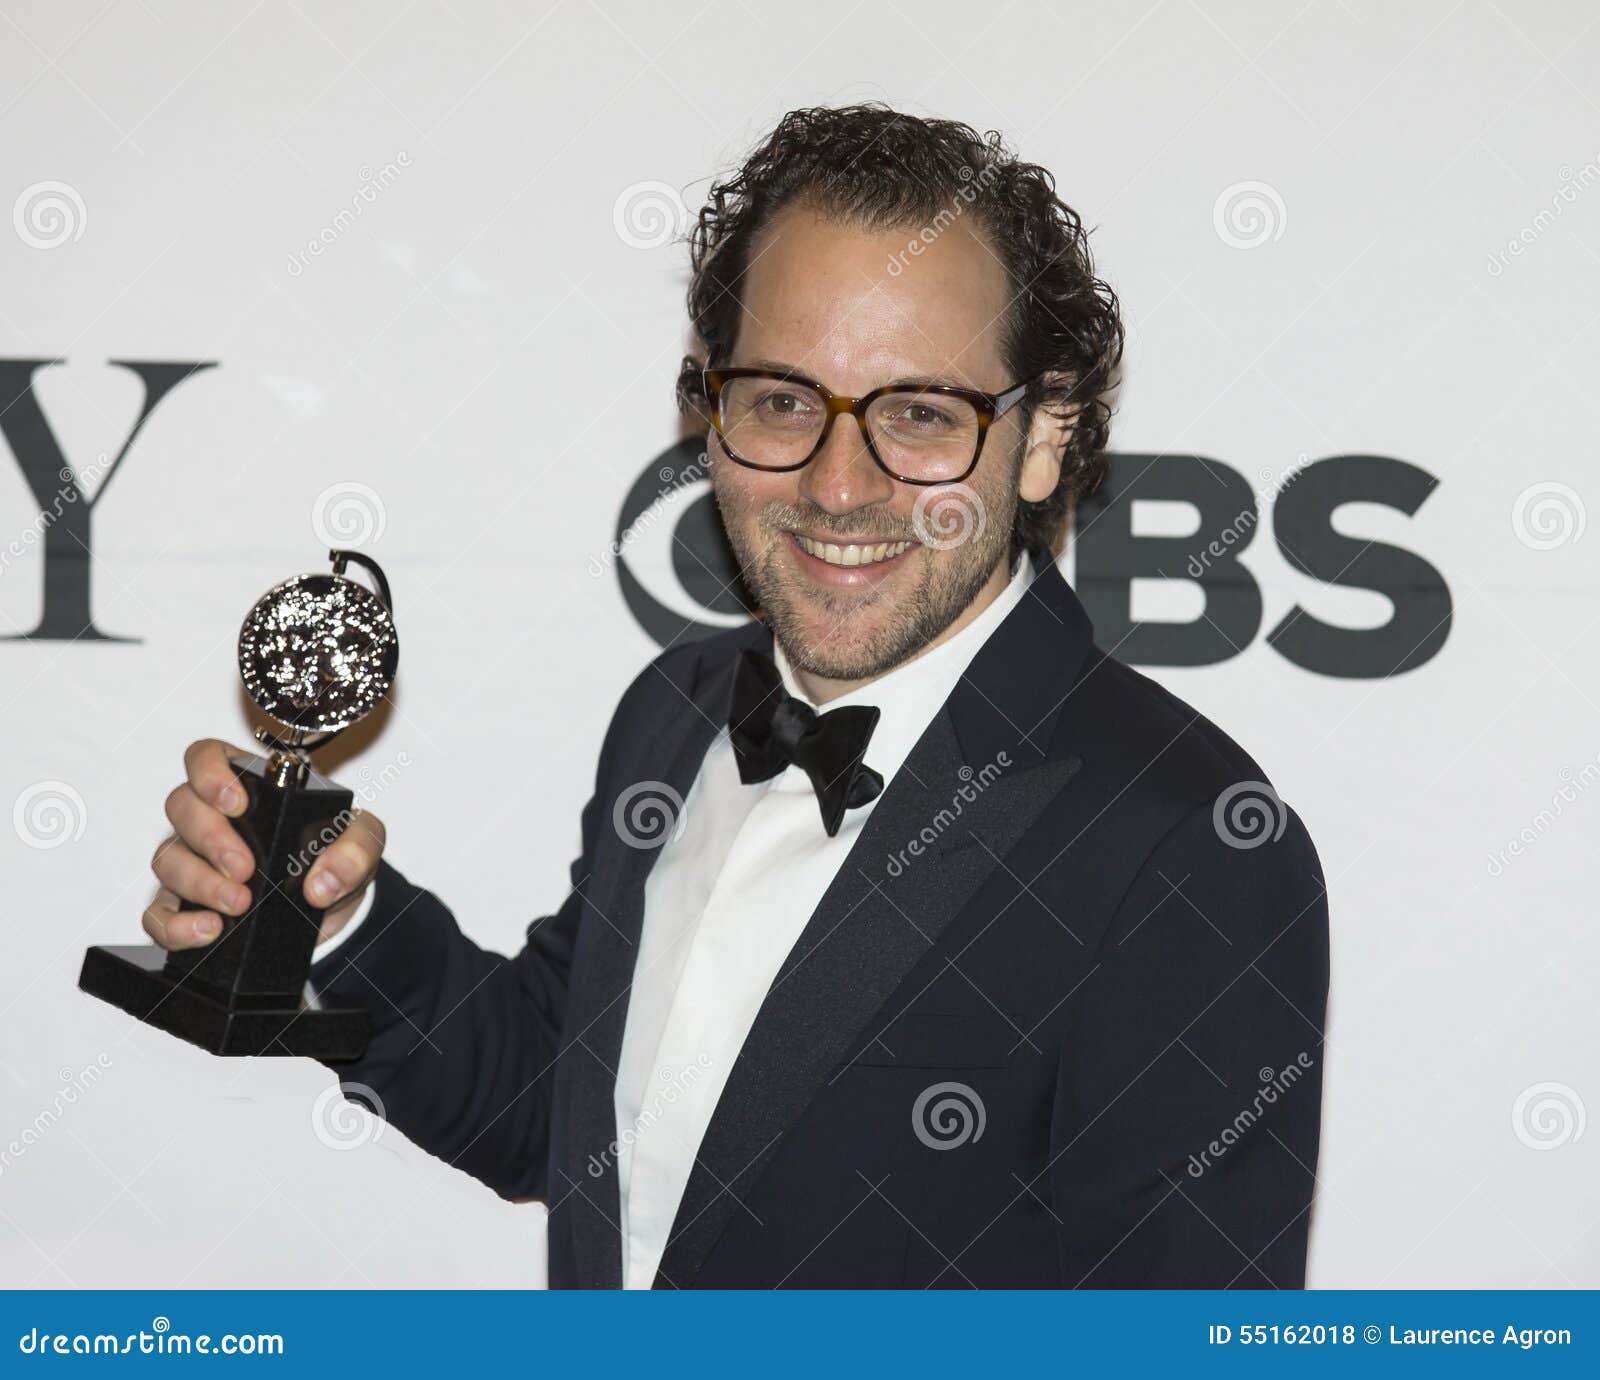 Director Sam Gold Wins at 69th Annual Tony Awards in 2015 Editorial